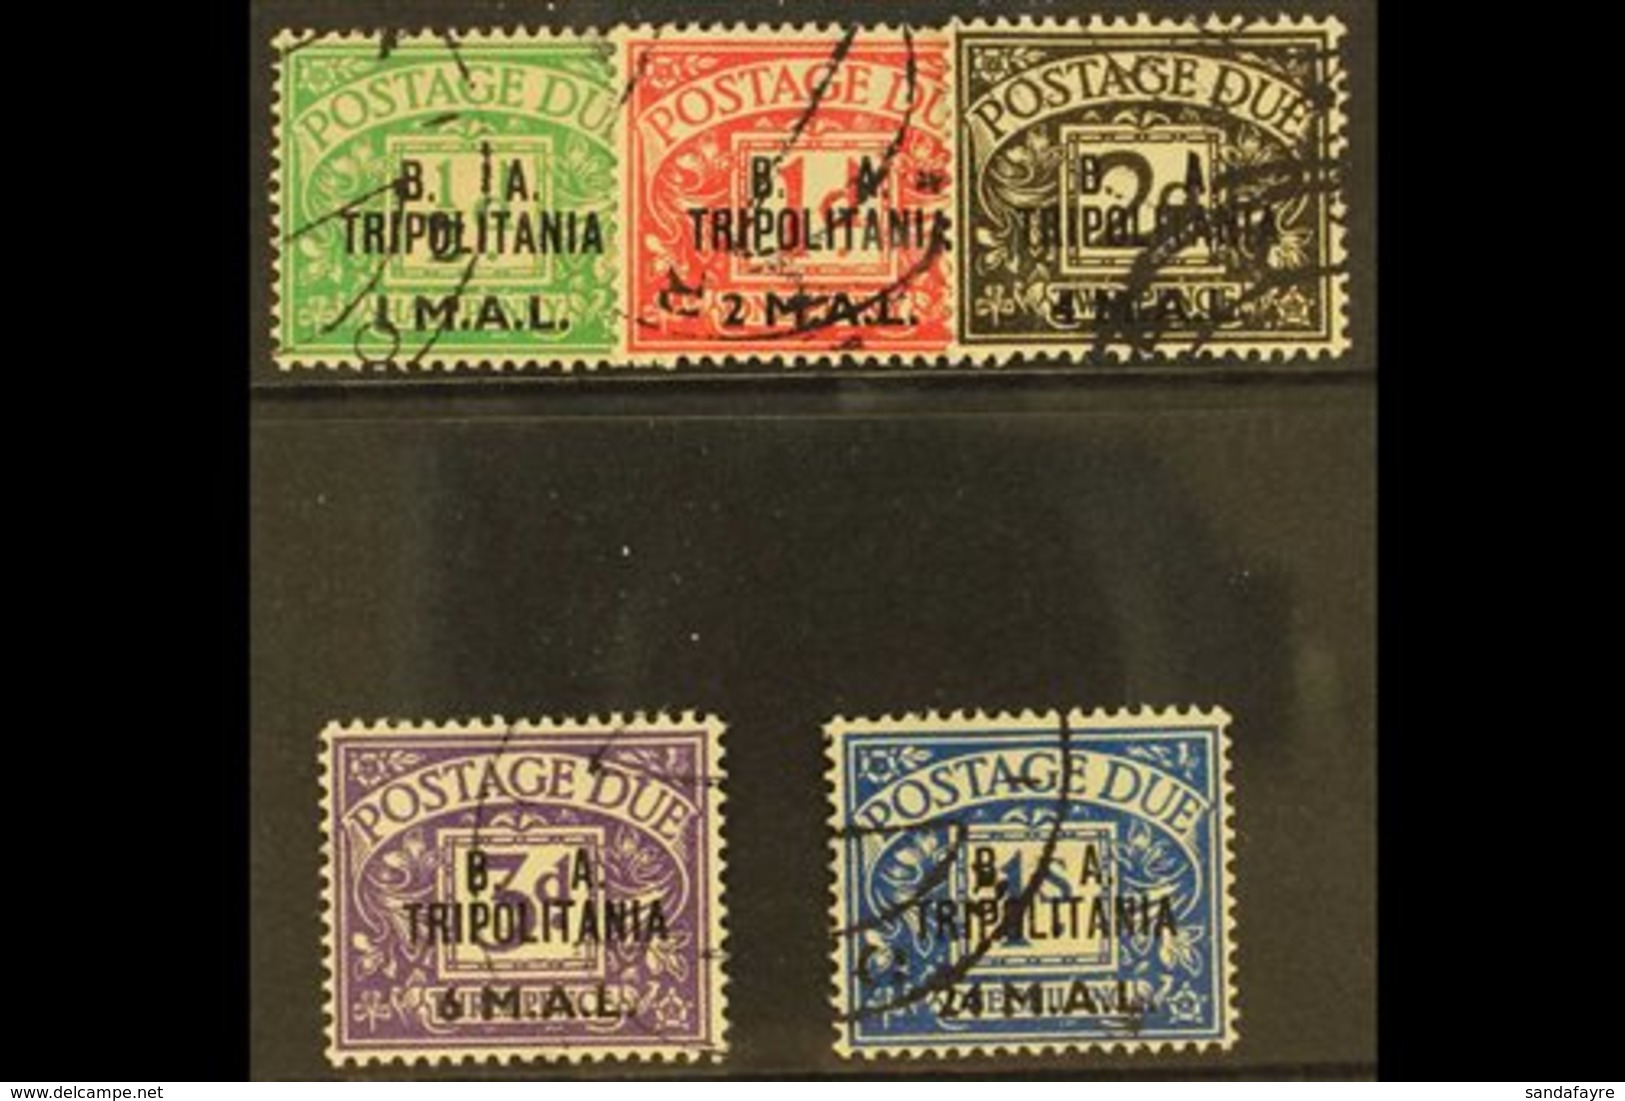 \Y TRIPOLITANIA\Y POSTAGE DUES 1950 Set Complete, SG TD6/10, Very Fine Used. Scarce Set. (5 Stamps) For More Images, Ple - Afrique Orientale Italienne